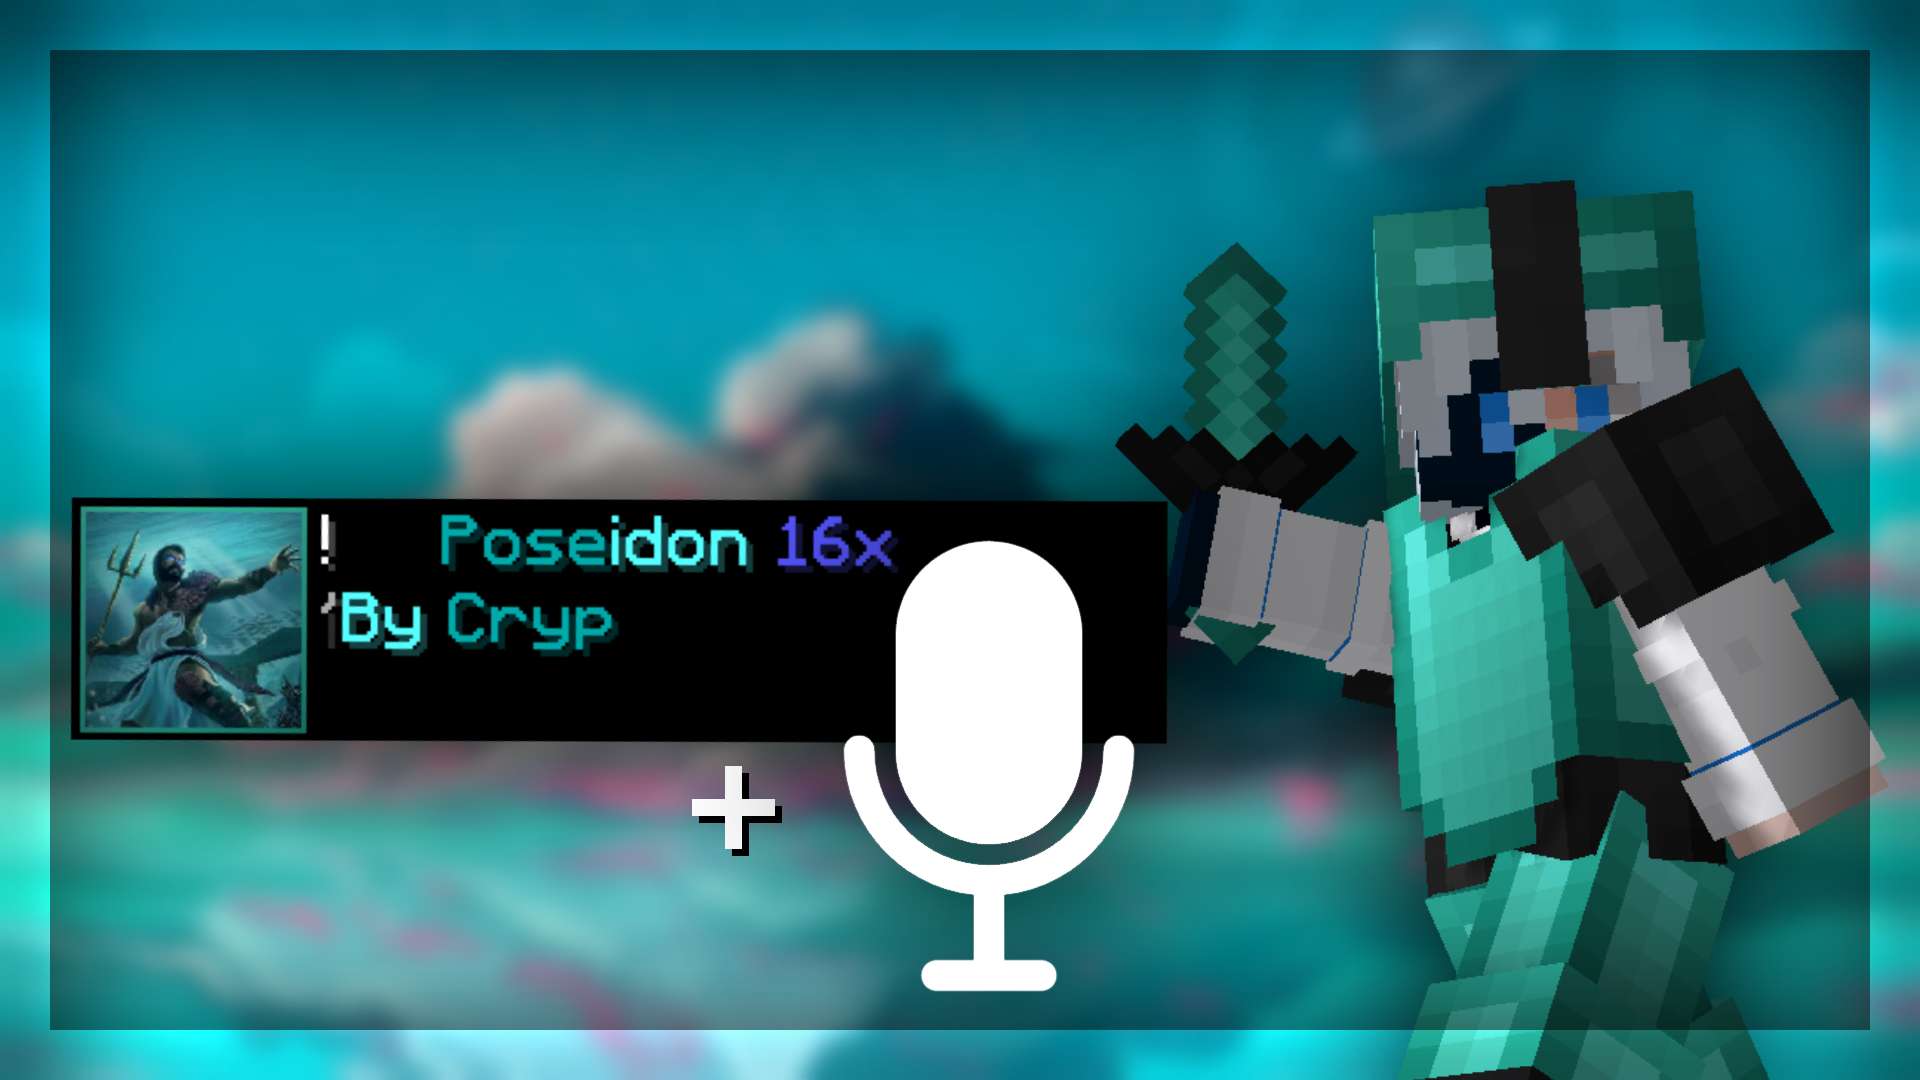 Poseidon 16x 16x by Cryp & By Cryp on PvPRP